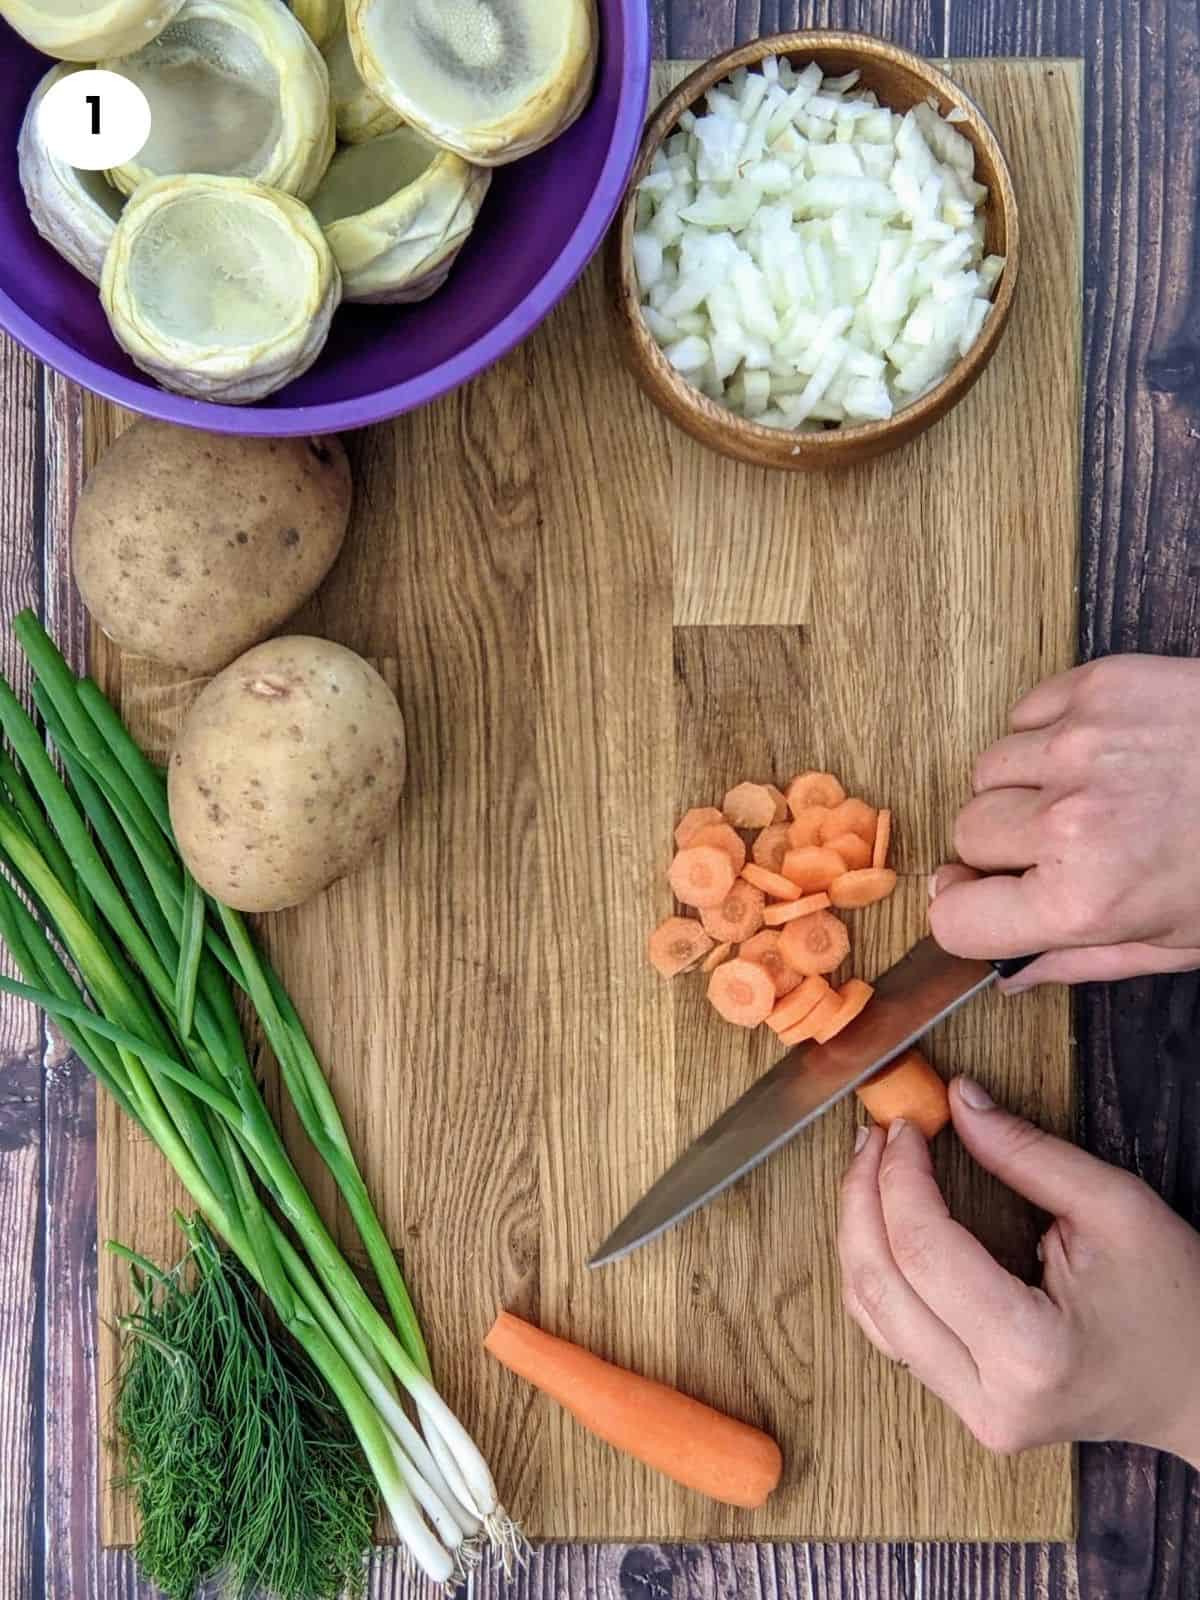 Chopping carrots in slices for artichoke stew